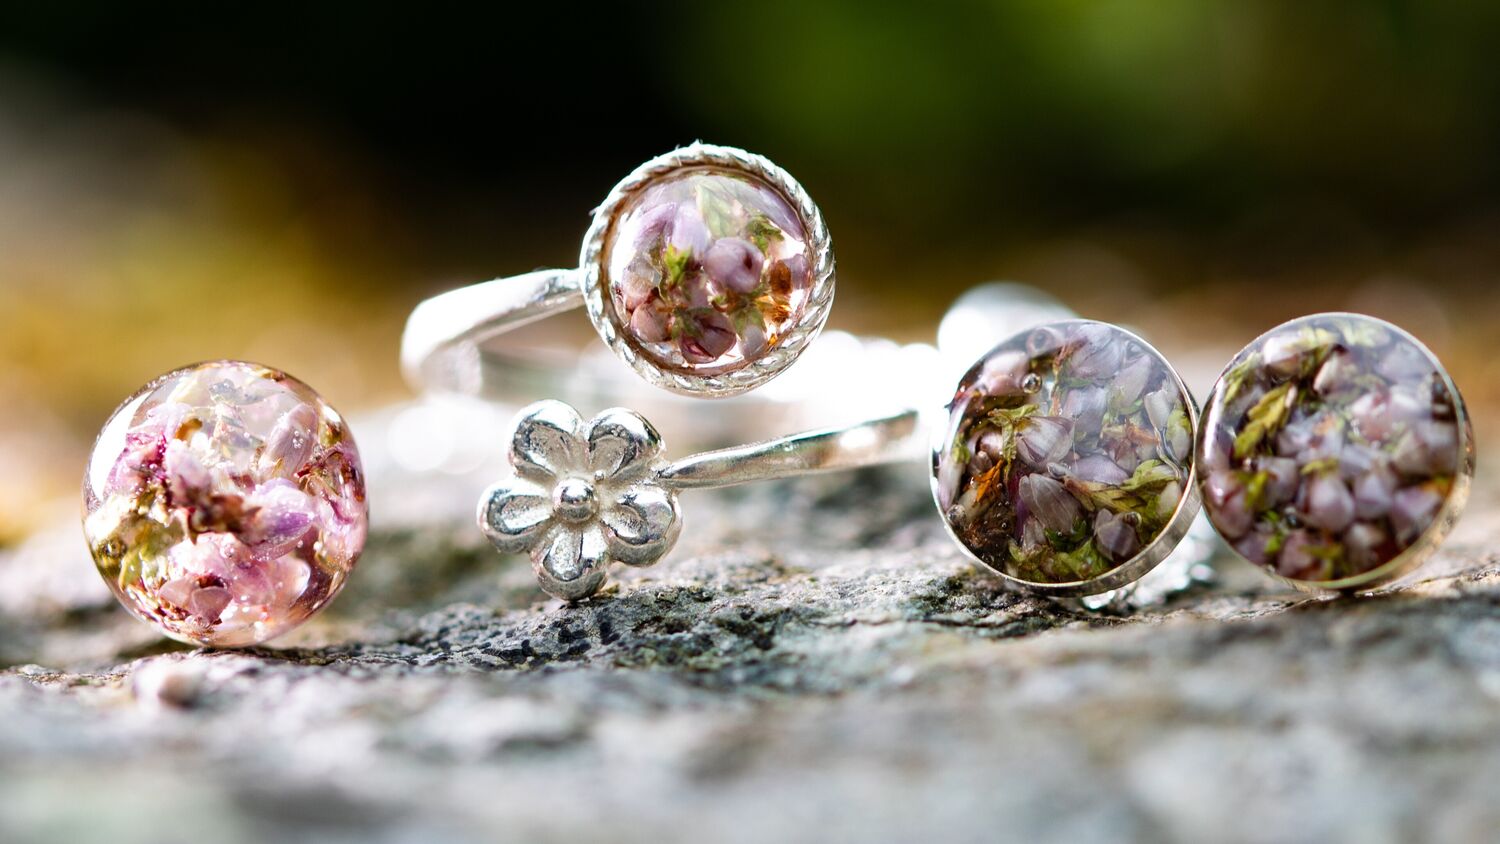 Close-up of a ring, pendant and earrings on a rock. The silver jewellery is made with heather embedded within resin.